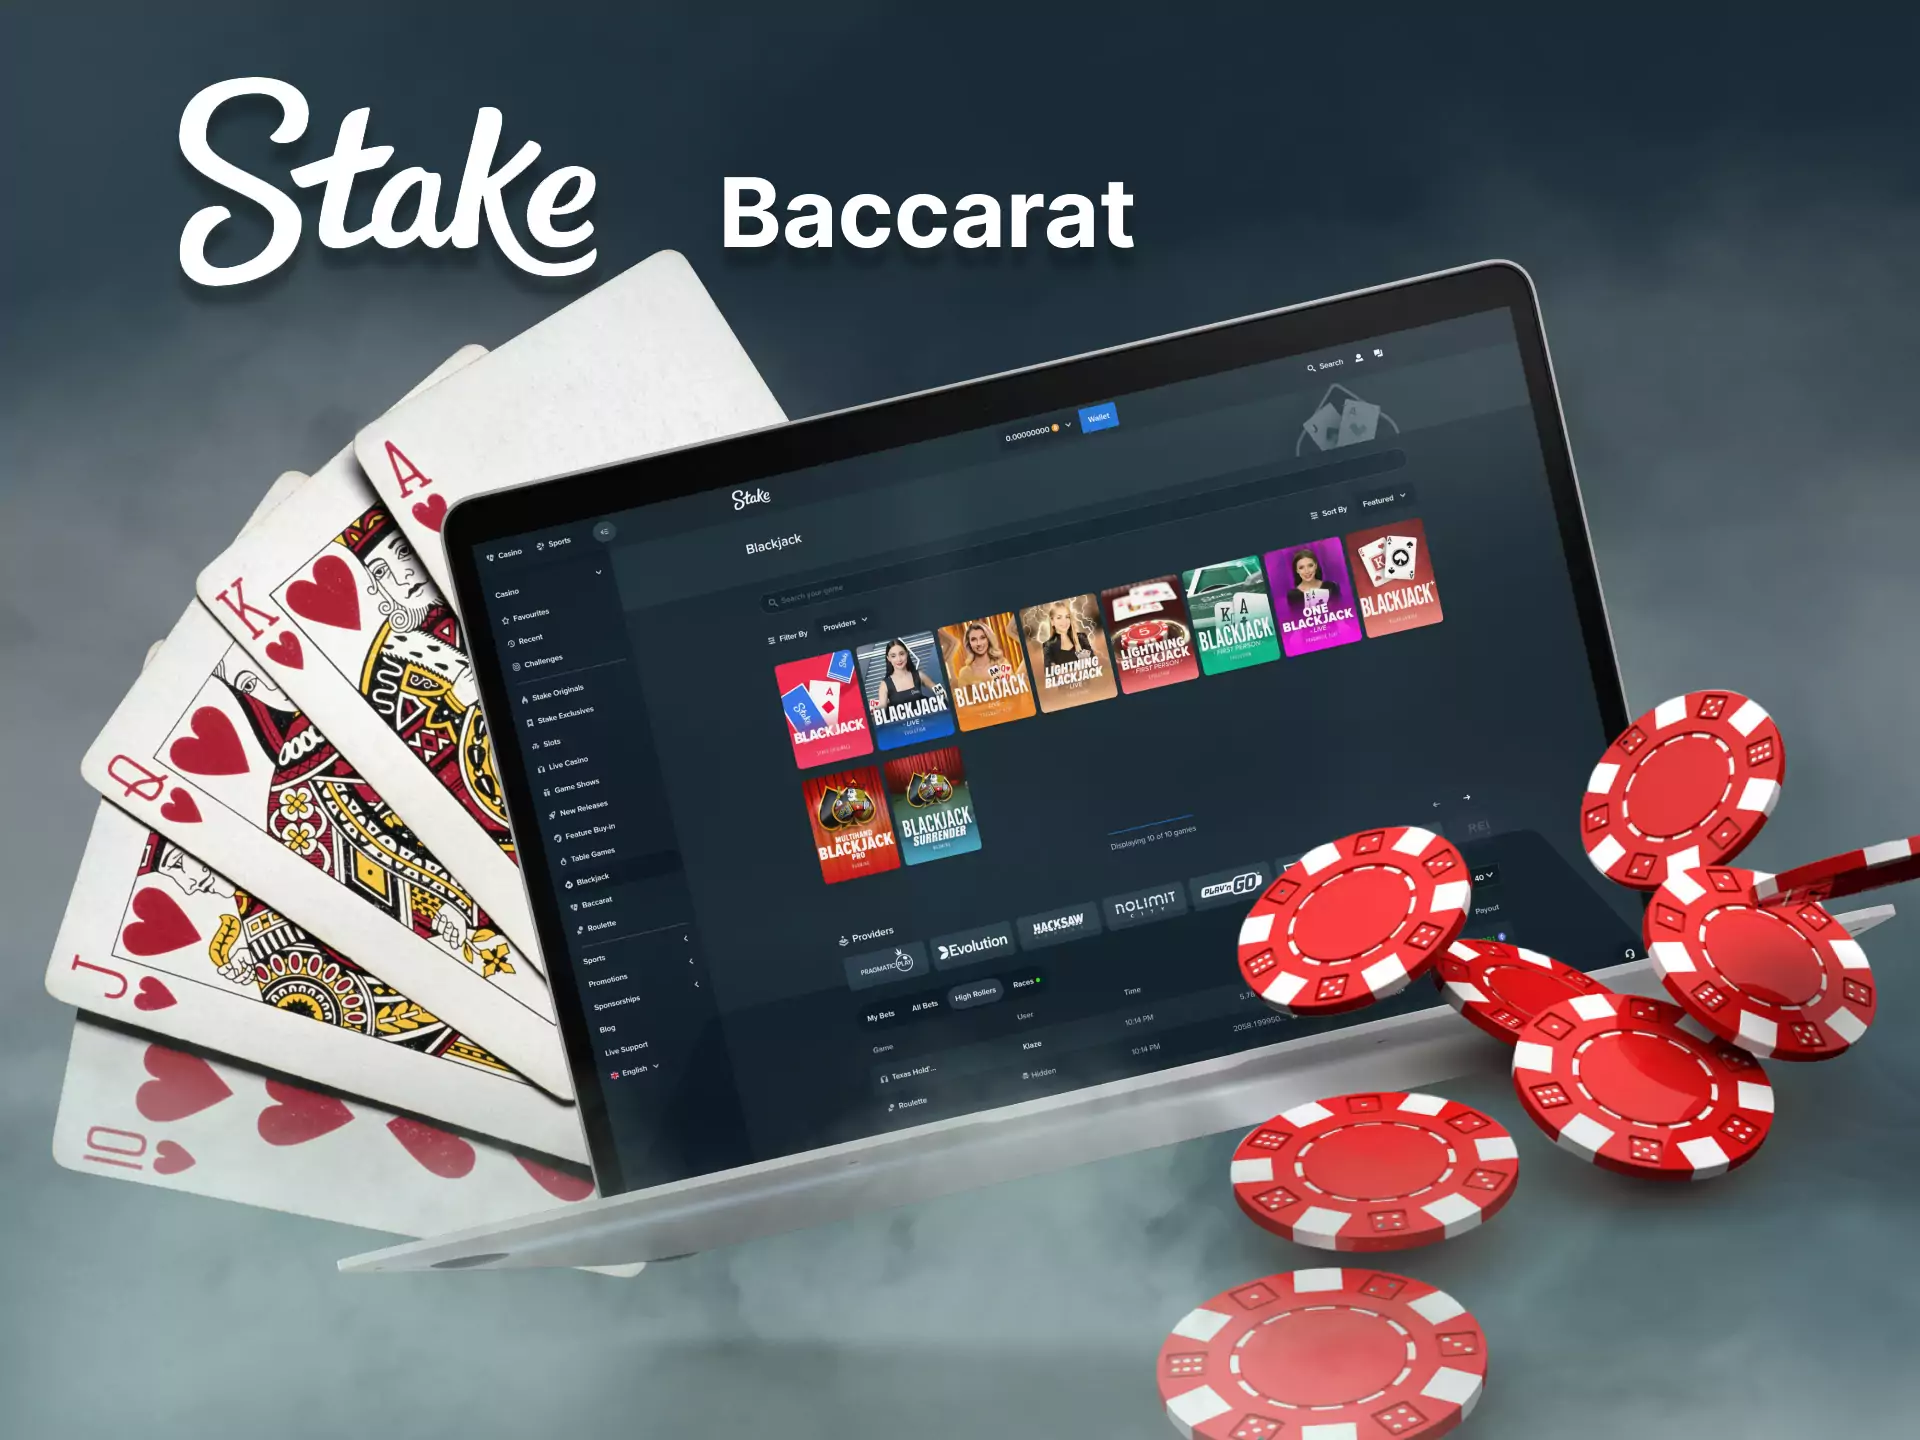 Visit the Stake online casino and play the game of baccarat on your device.